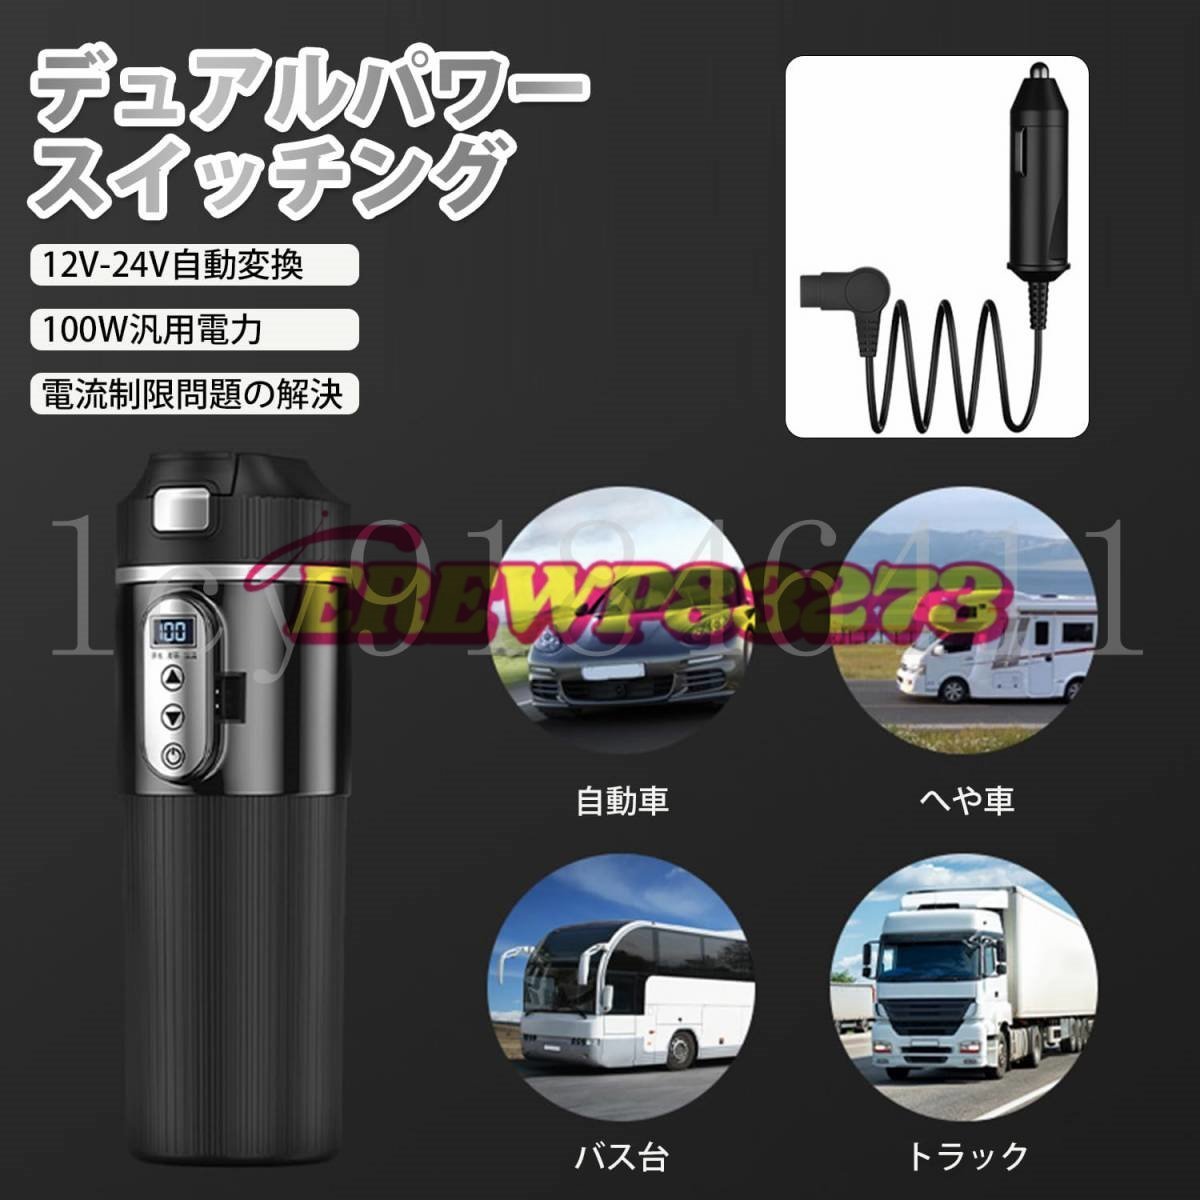  in-vehicle electric kettle 500ml DC12V small size car /24V truck combined use heat insulation insulation car hot water .. vessel hot water dispenser temperature display 304 stainless steel steel sleeping area in the vehicle coupler 